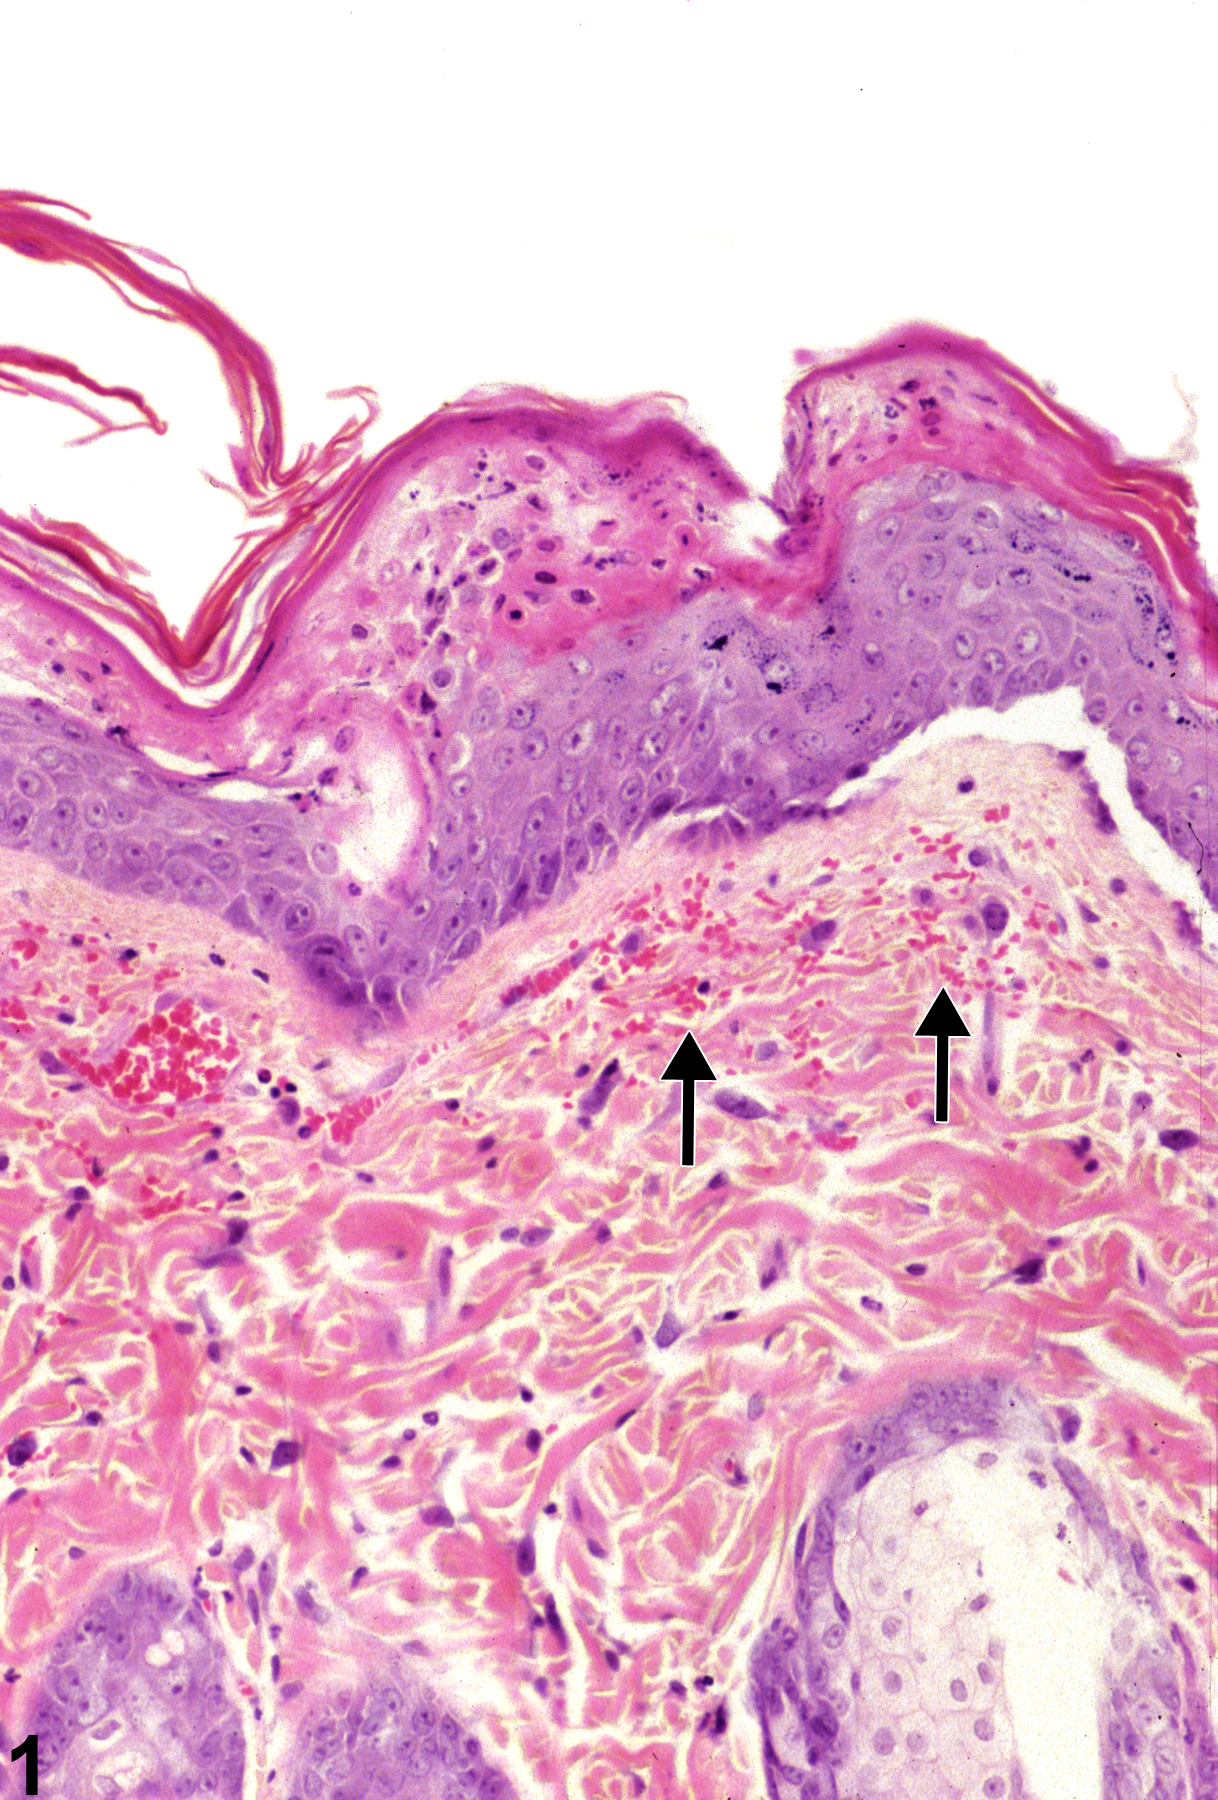 Image of hemorrhage in the skin from a male F344/N rat in a subchronic study